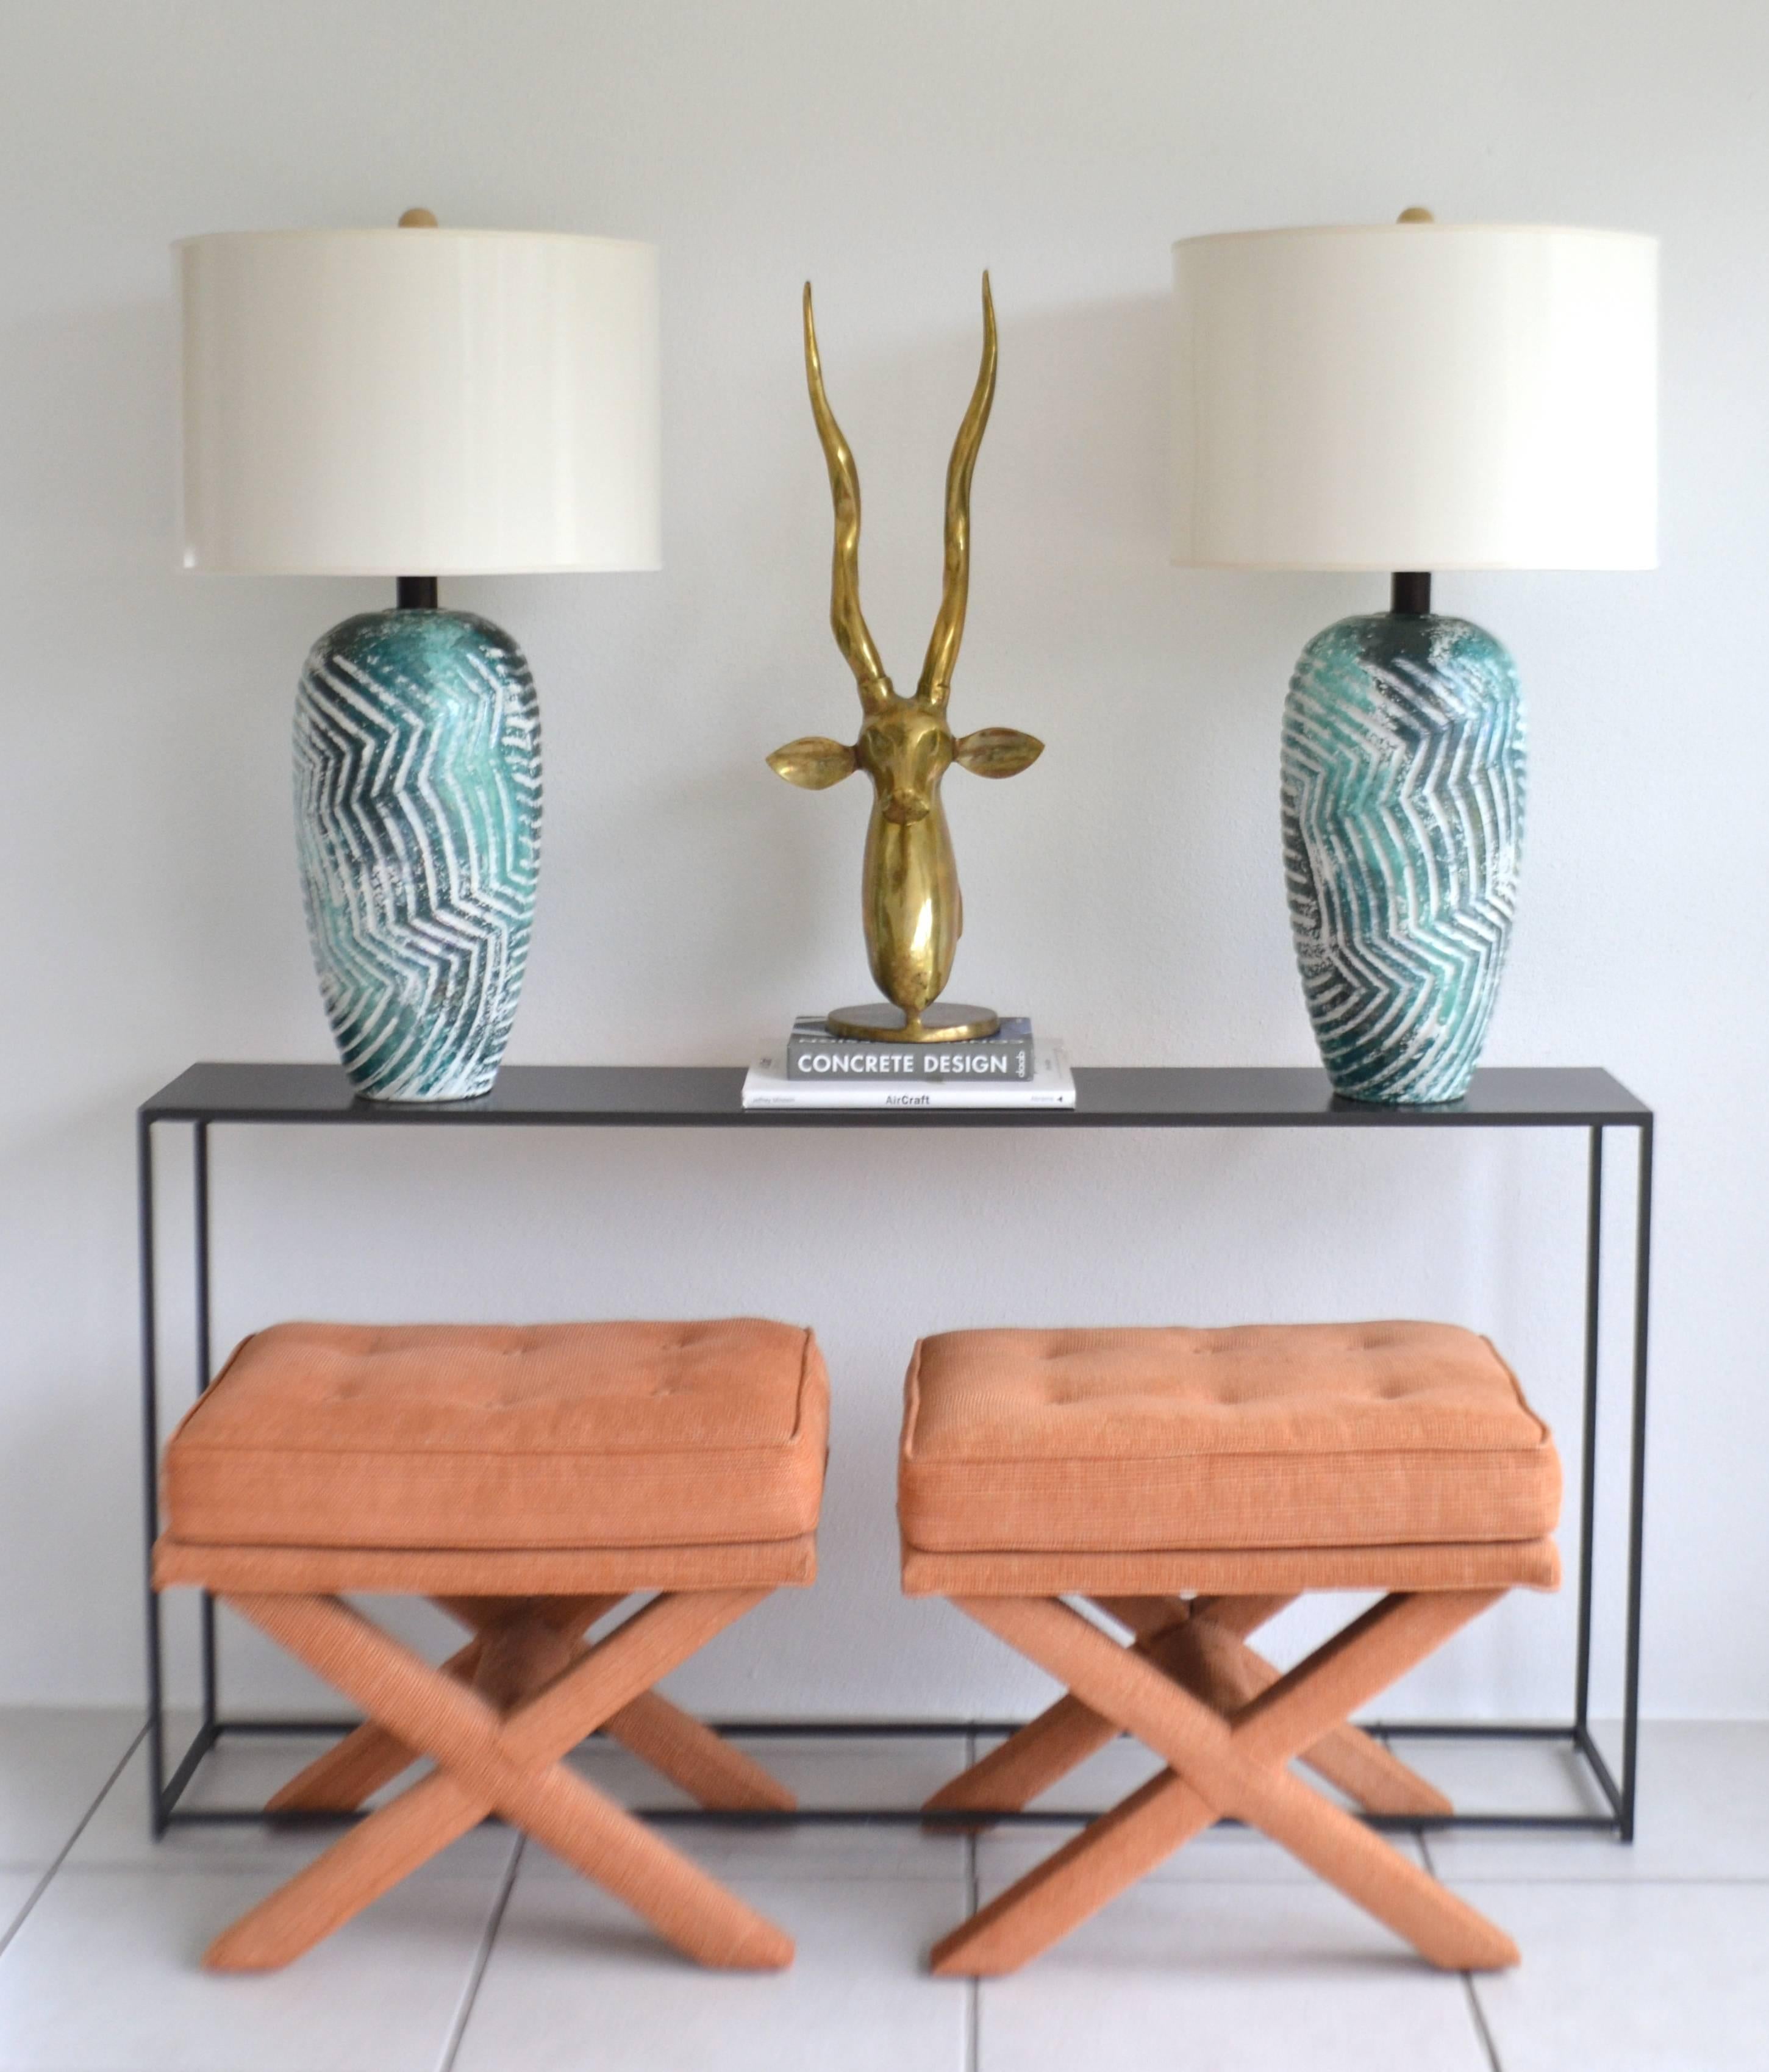 Striking pair of graphic Postmodern ceramic jar form table lamps, circa 1970s-1980s. These highly decorative artisan crafted polychrome drip glazed lamps are designed with an incised geometric pattern and wired with brass fittings.
Shades not